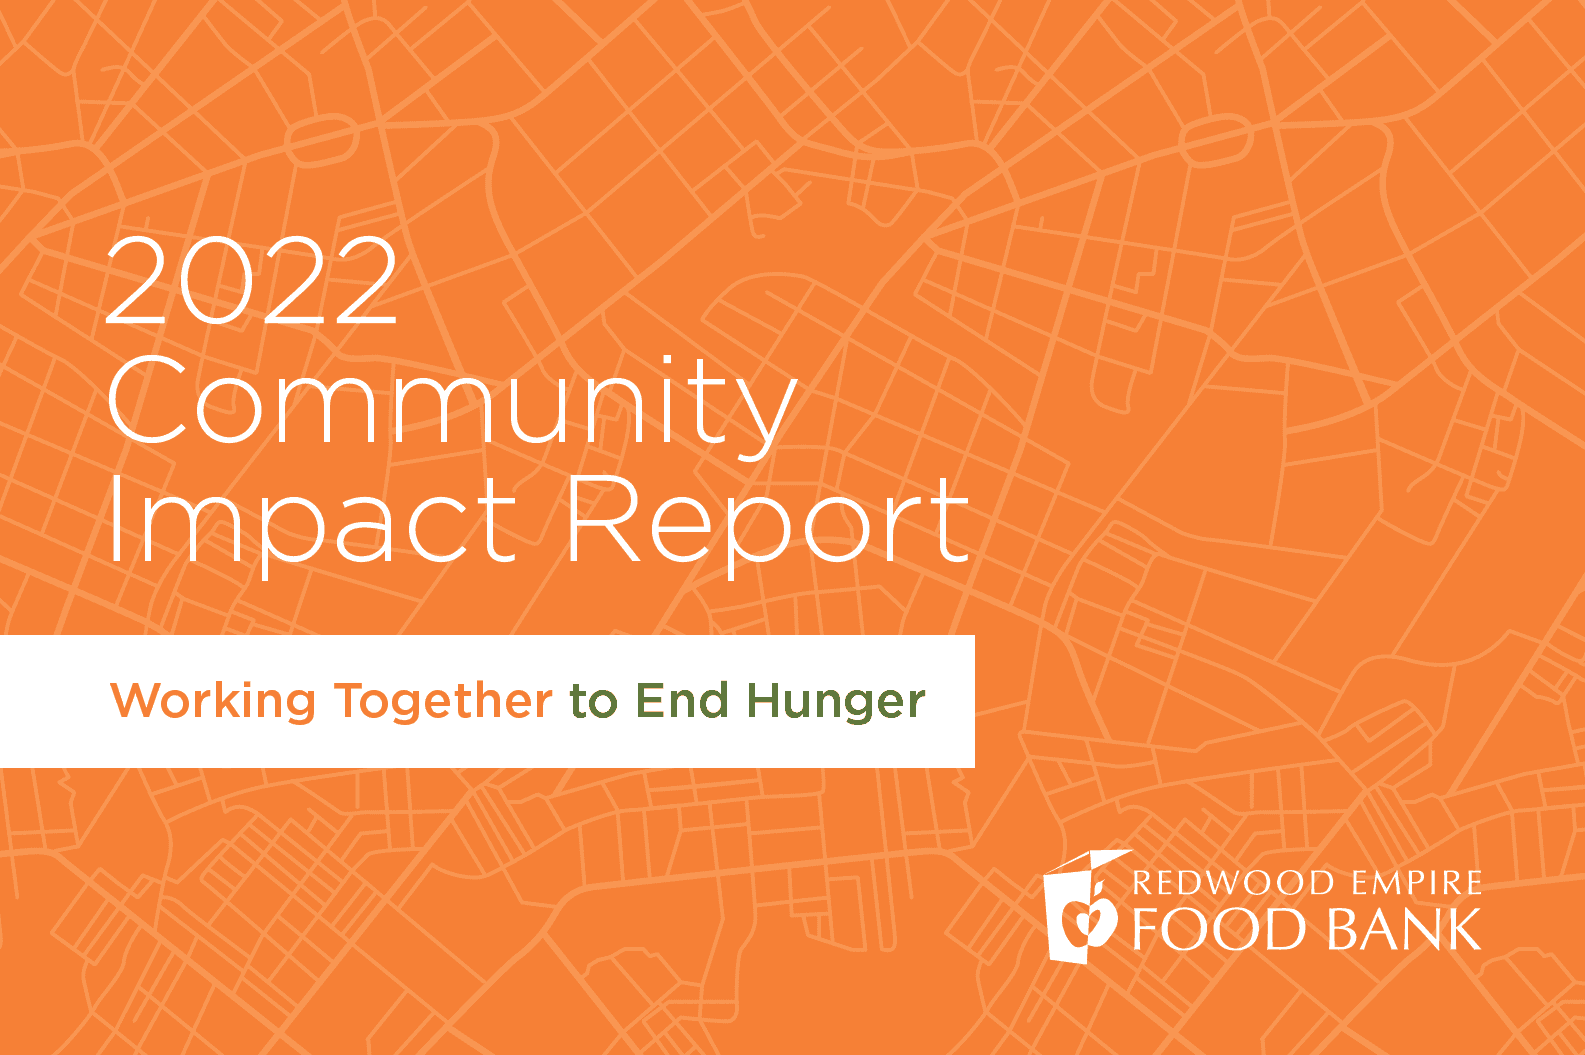 Our 2022 Community Impact Report is now available.